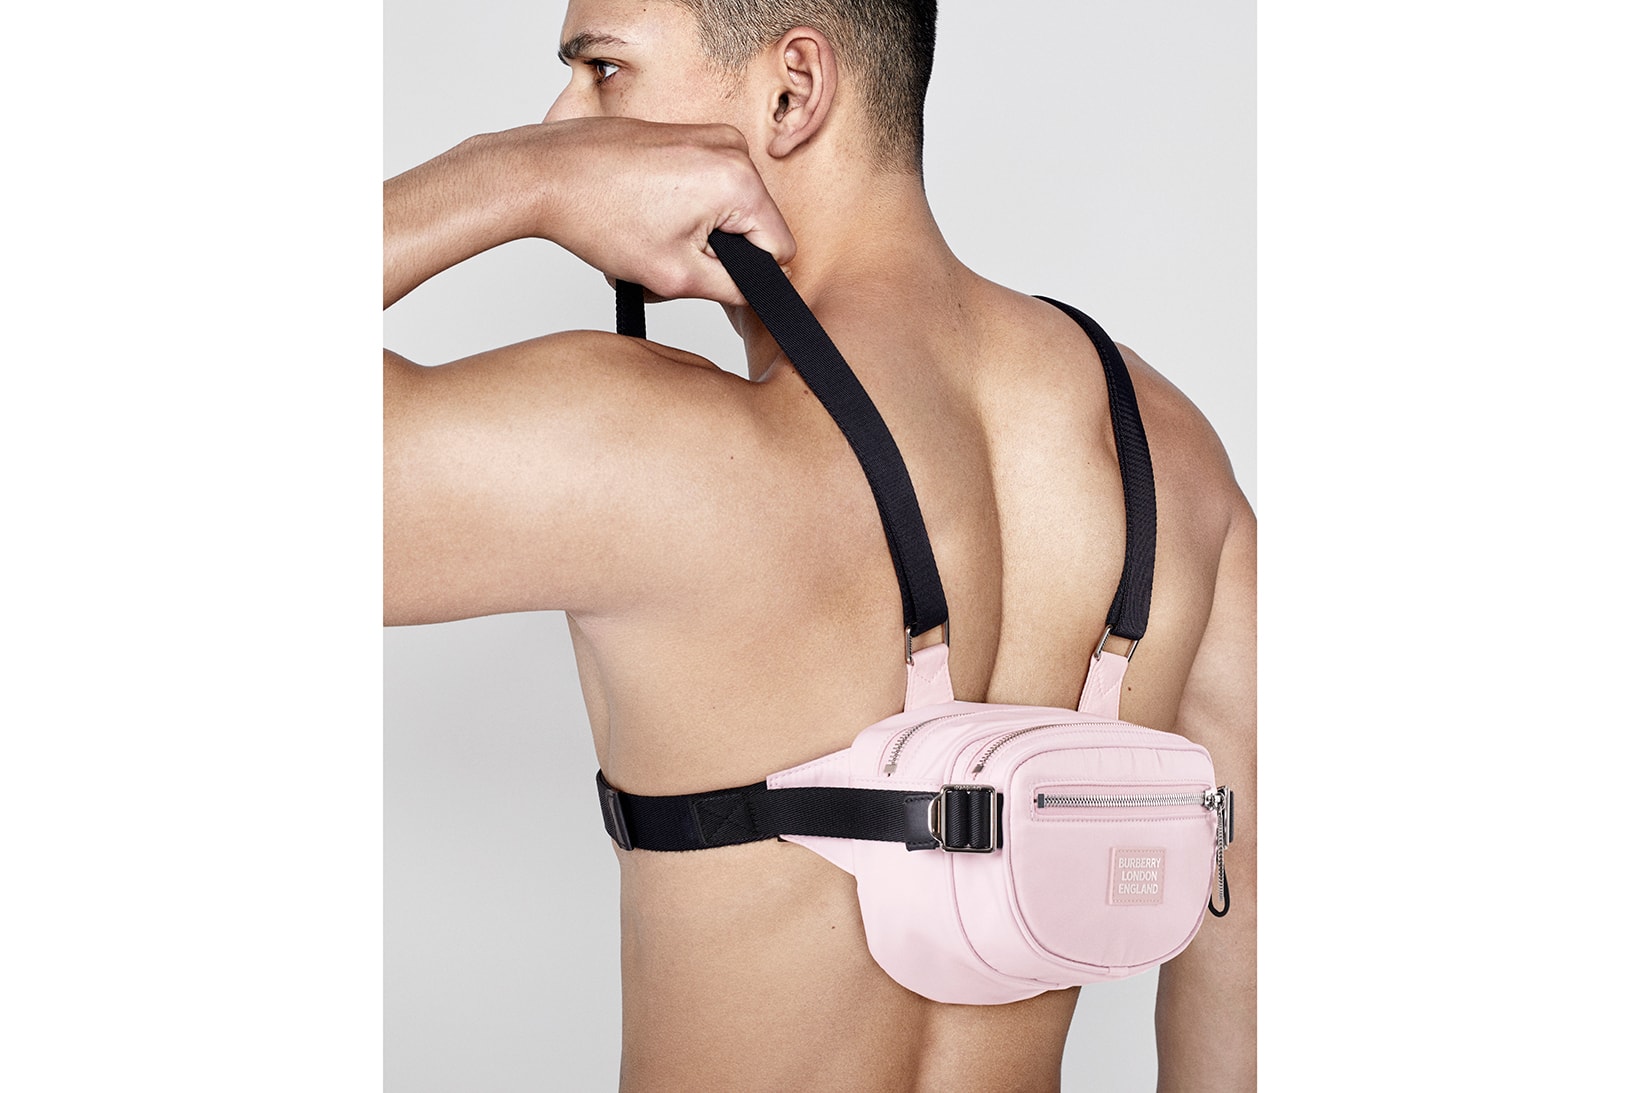 Burberry B Series Pastel Pink Cannon Belt Bag Release Date